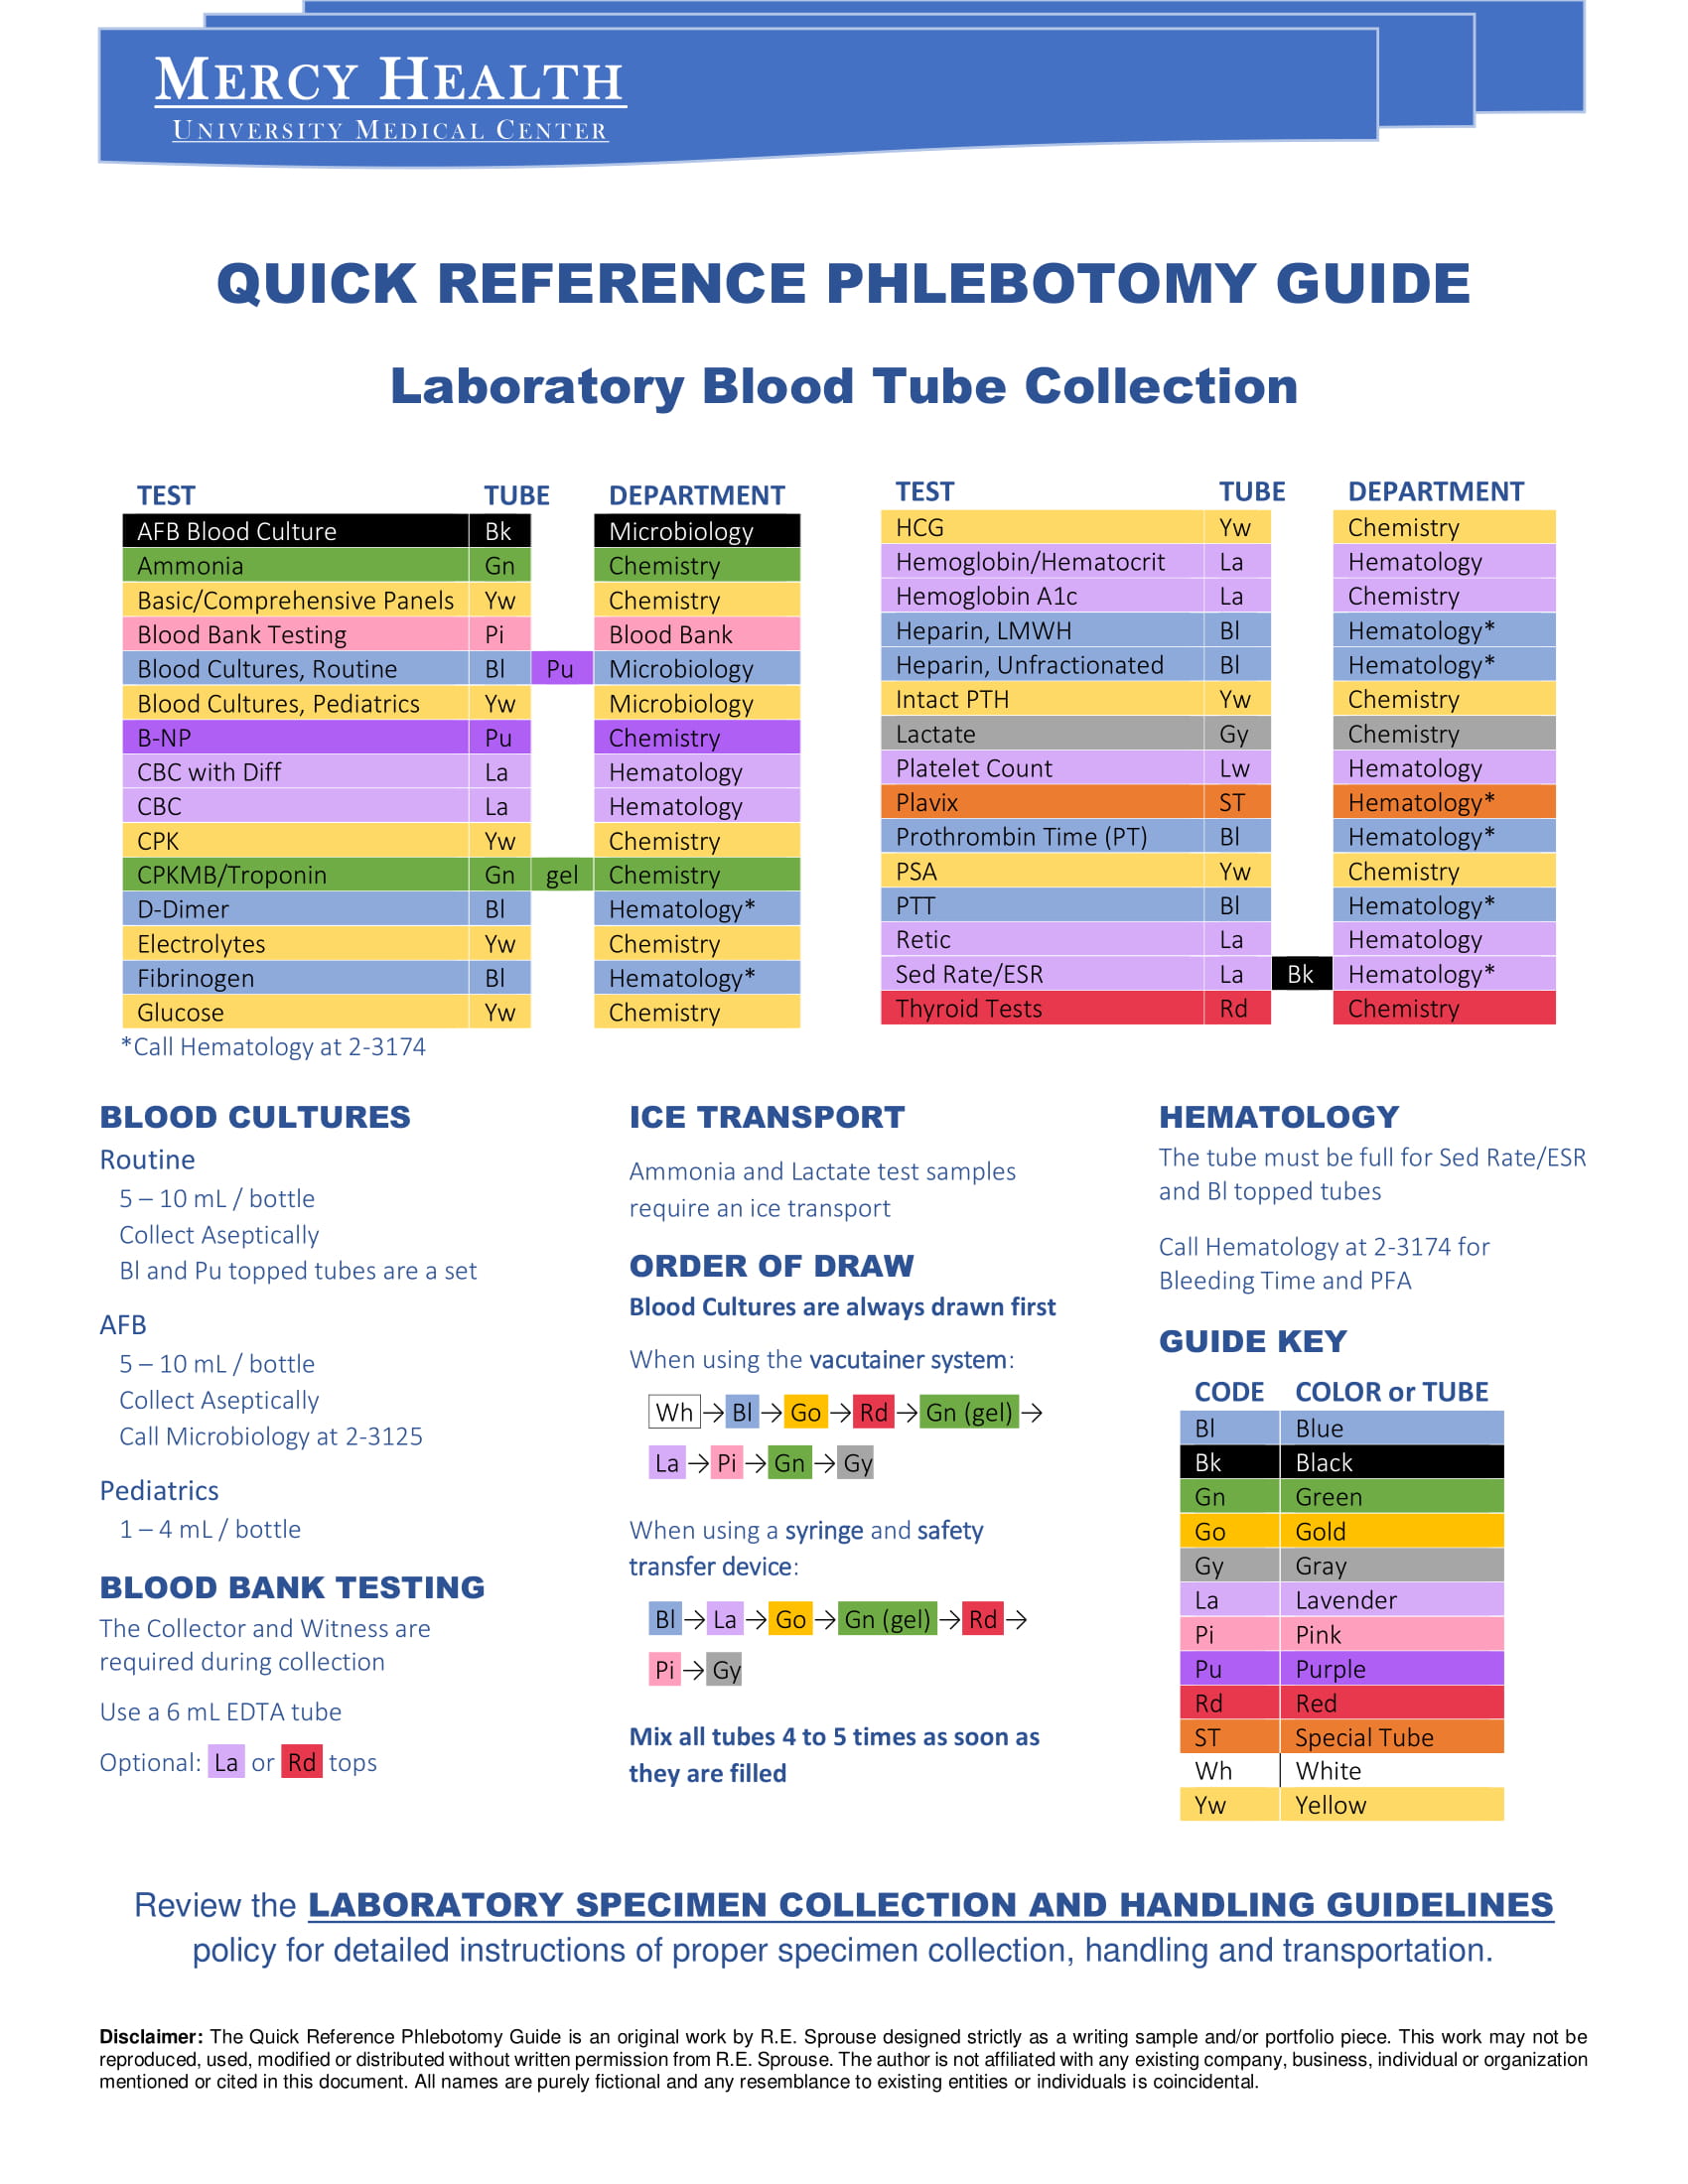 Quick Reference Phlebotomy Guide Ex01